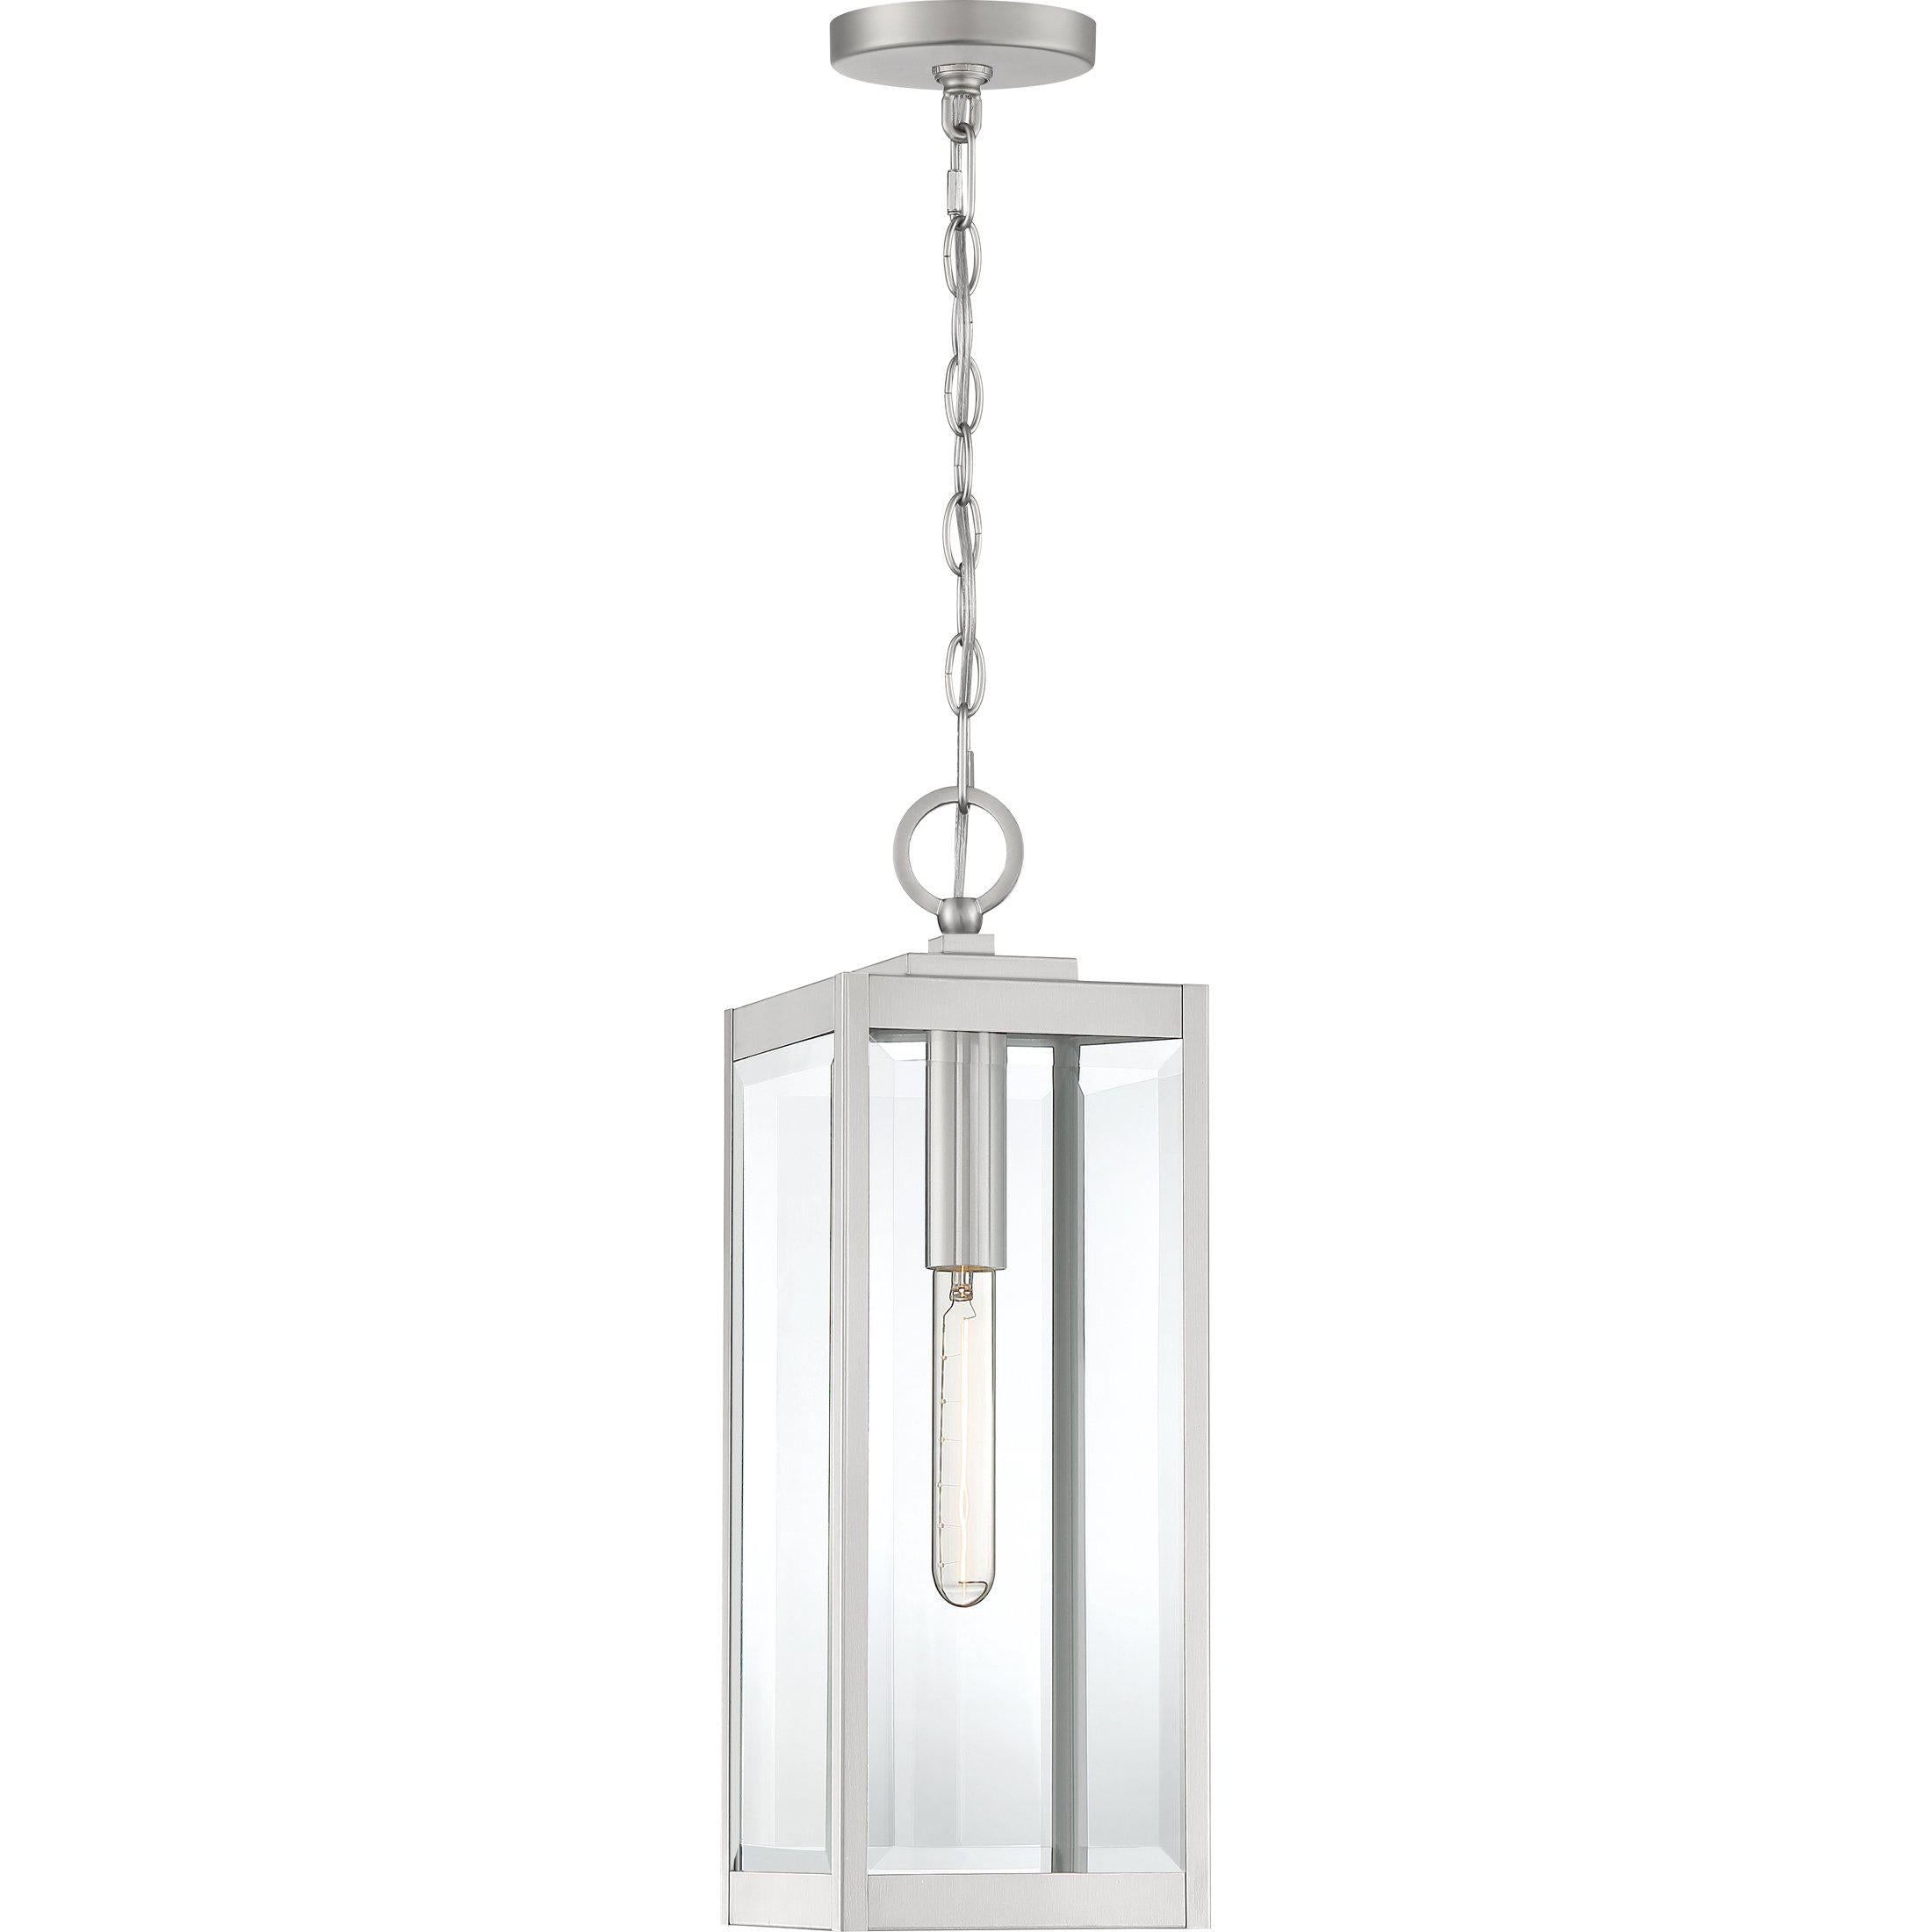 Quoizel  Westover Outdoor Lantern, Hanging Outdoor Light Fixture l Hanging Quoizel Stainless Steel  